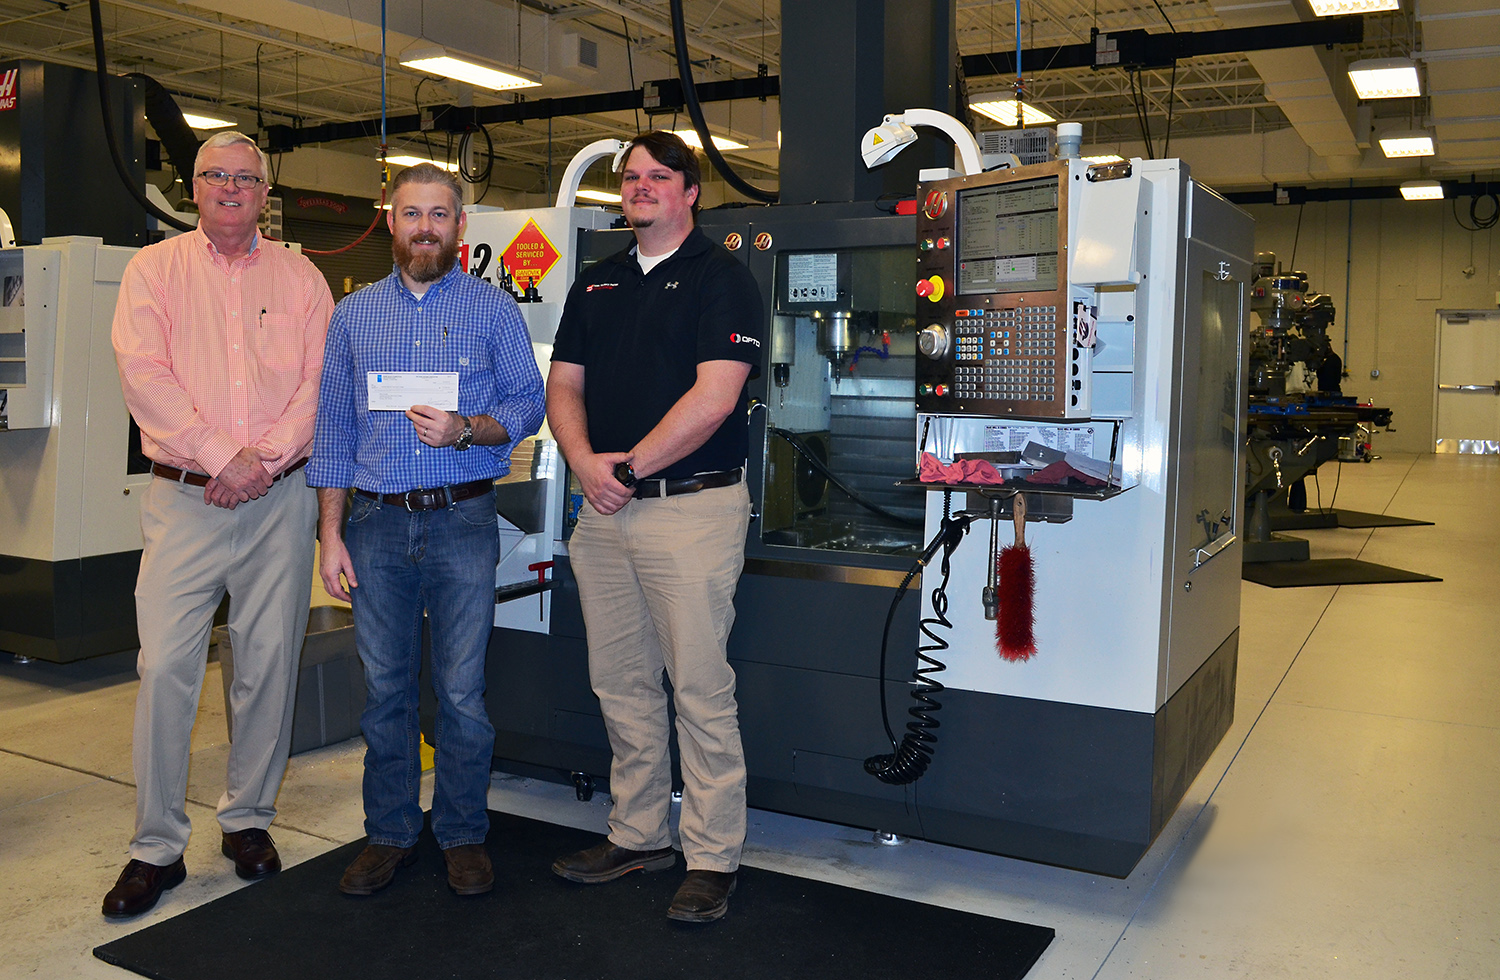 Haas Specialist in Machining and CNC Technology lab